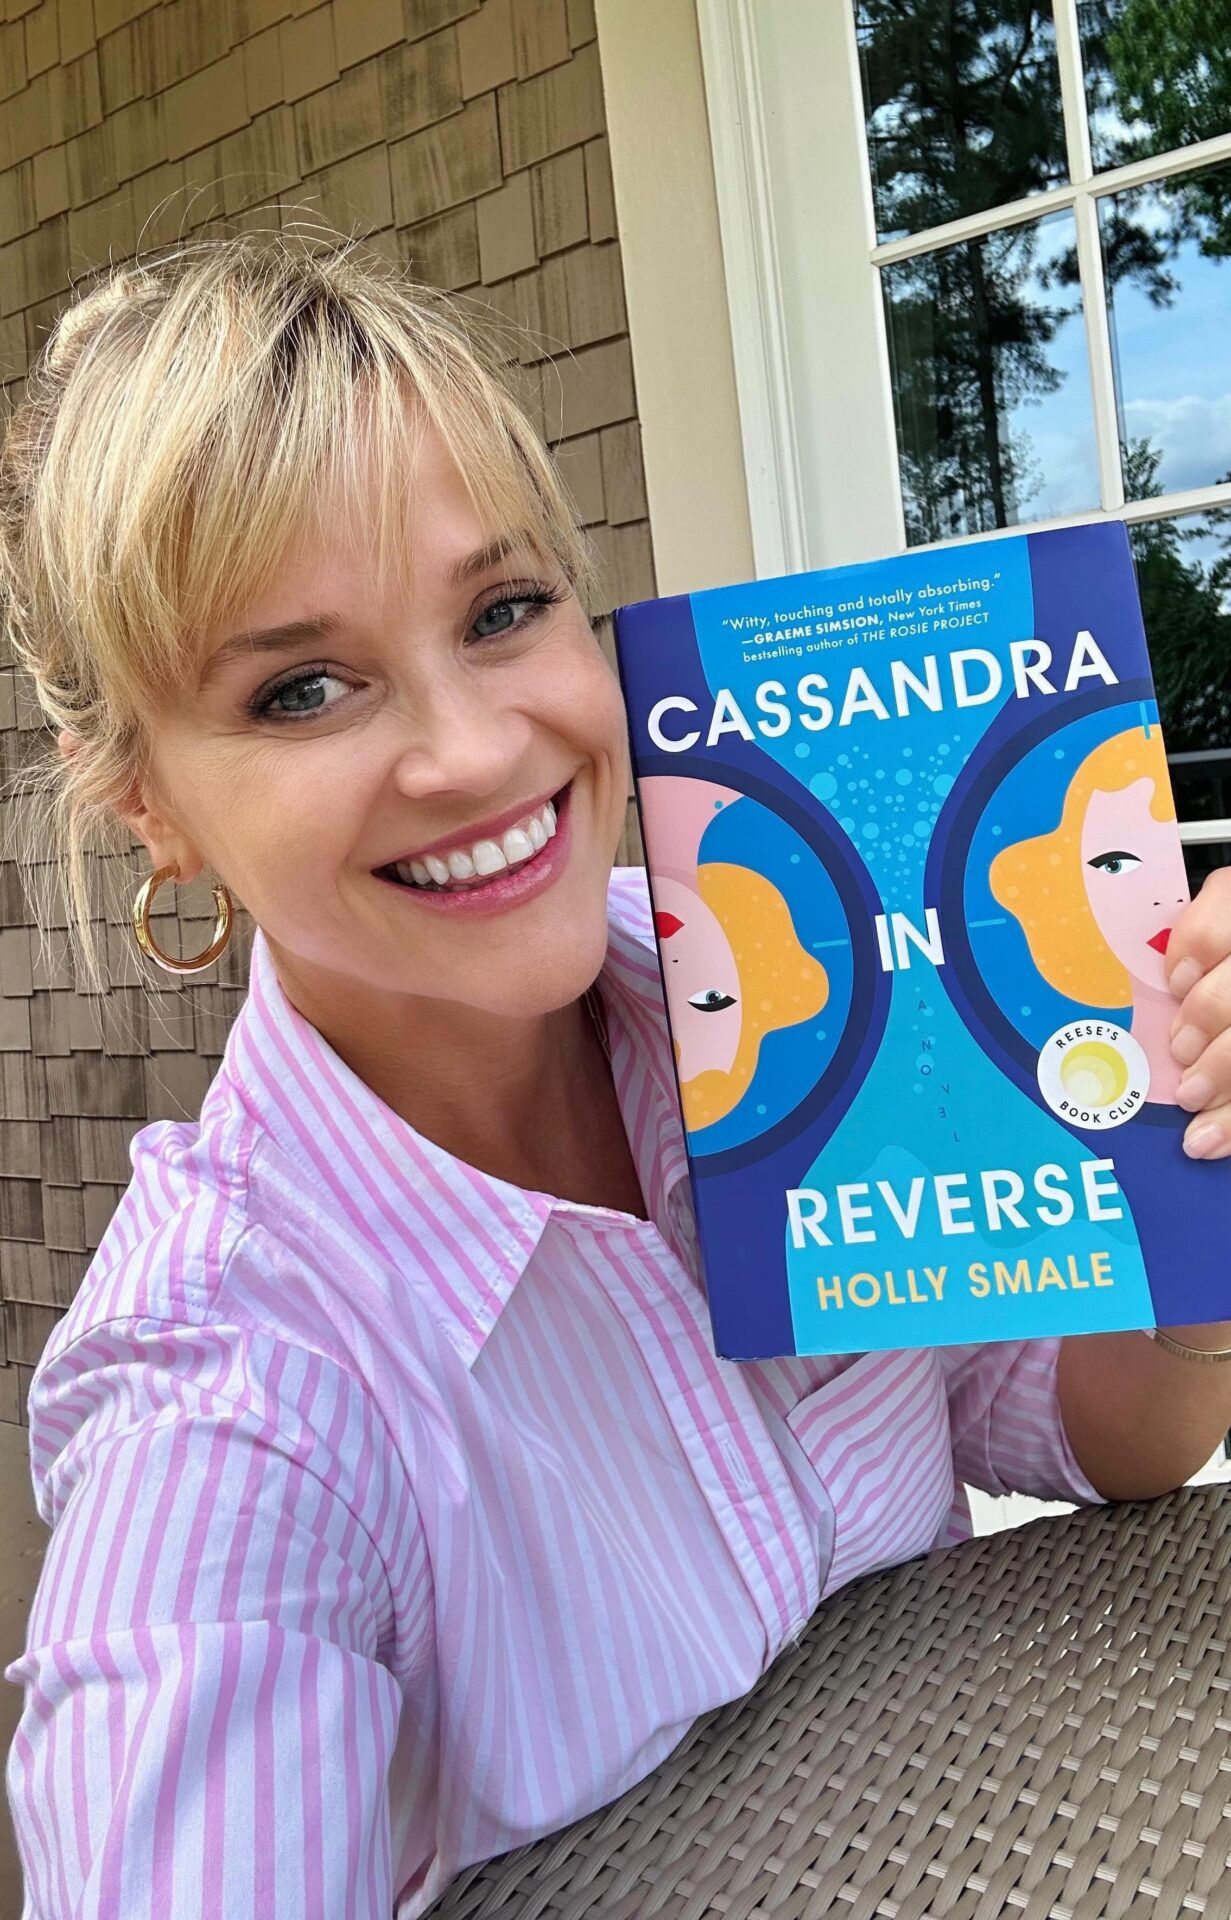 Reese Witherspoon – Instagram post